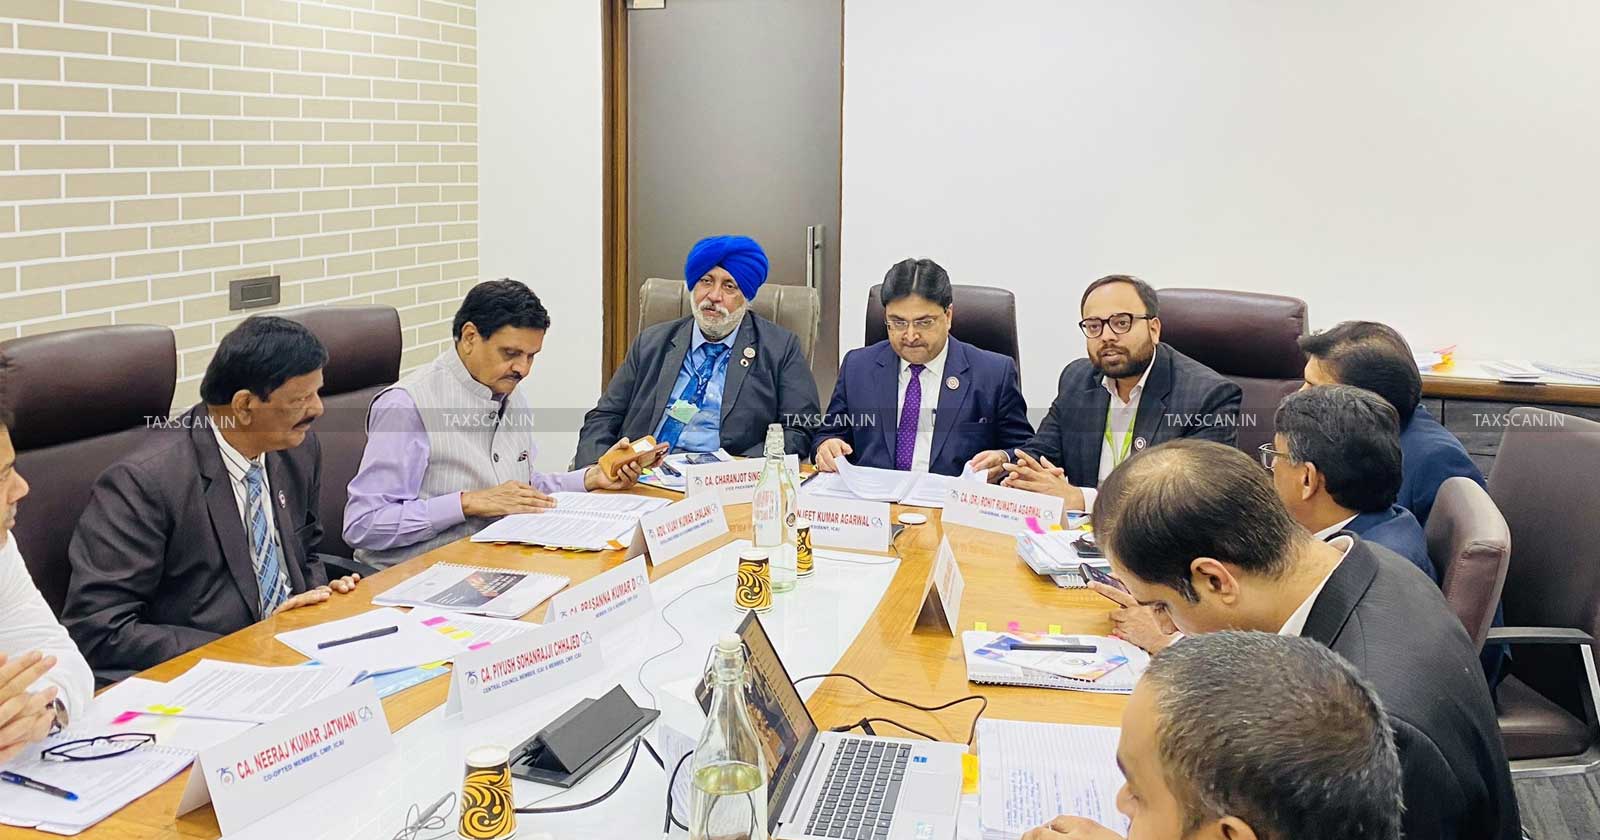 ICAI - ICAI President - ICAI Vice President - CMP Meeting - Institute of Chartered Accountants of India - TAXSCAN